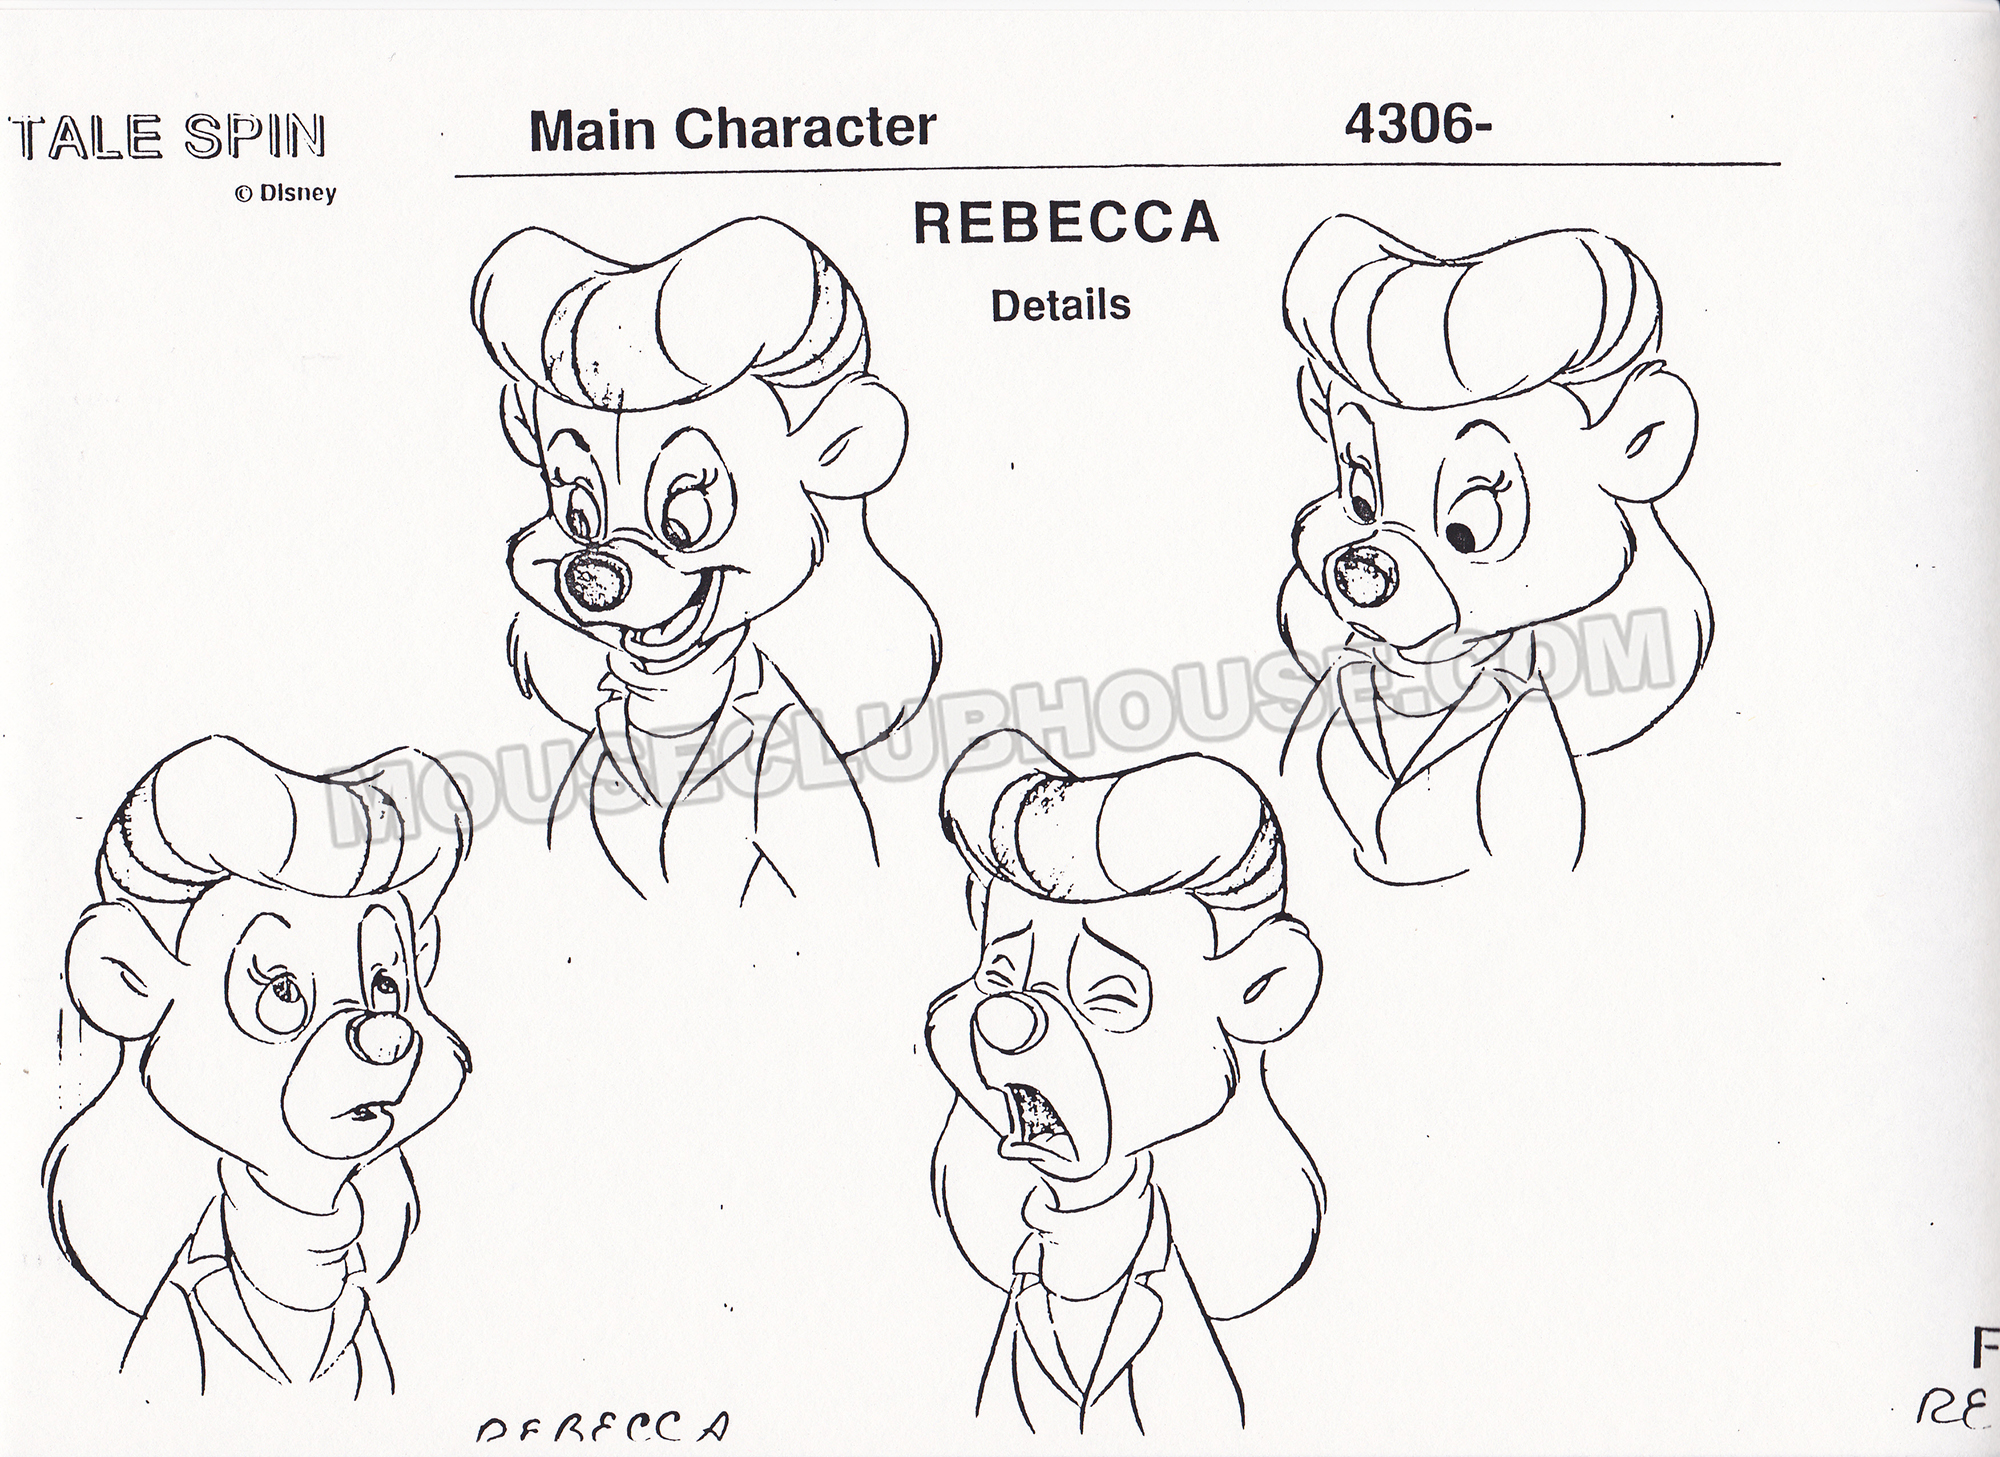 Rebecca details - I always thought it was amazing they got Sally Struthers to voice Rebecca, from one of the greatest sitcoms in history, All in the Family